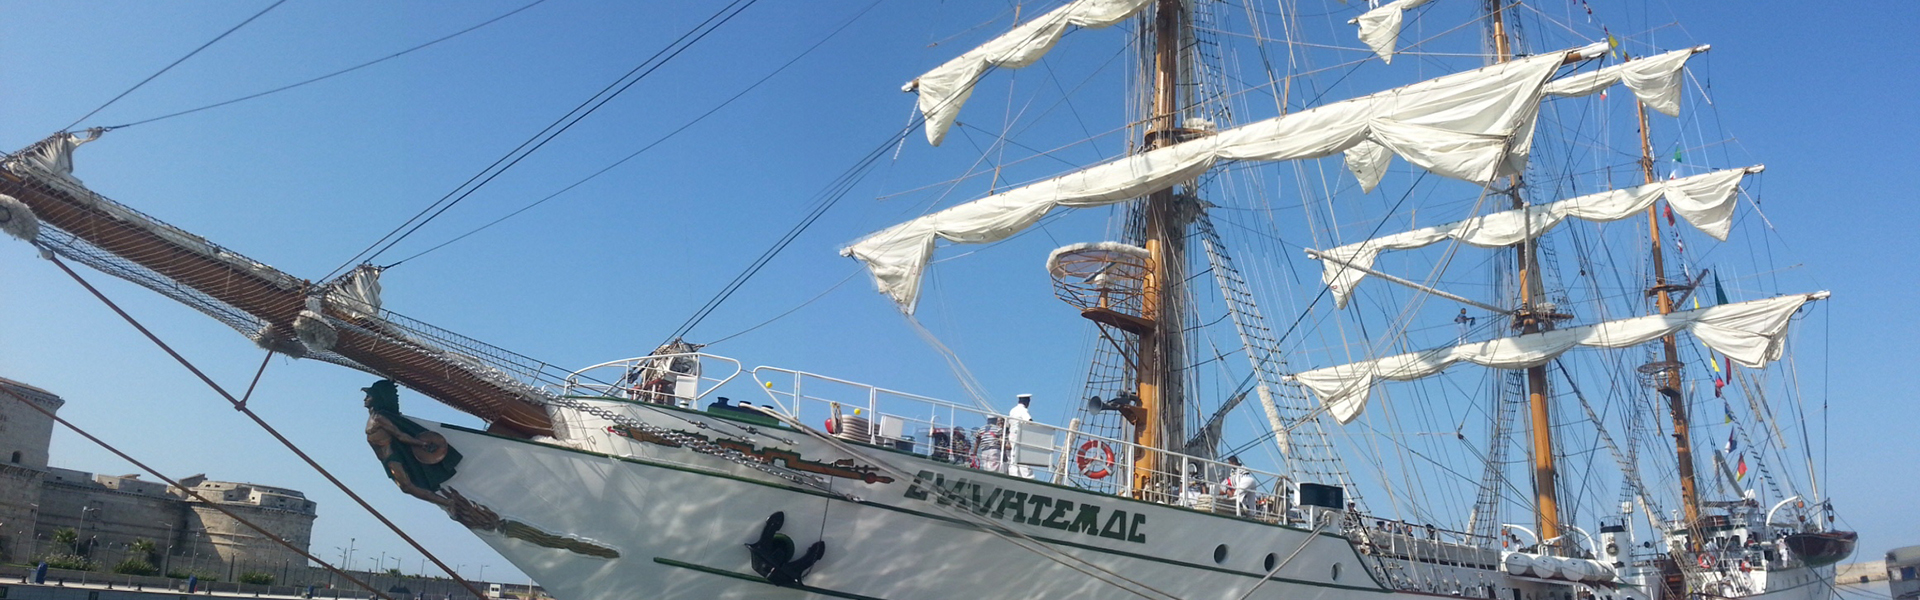 The Cuauhtemoc is moored at pier 5 of the port of Civitavecchia